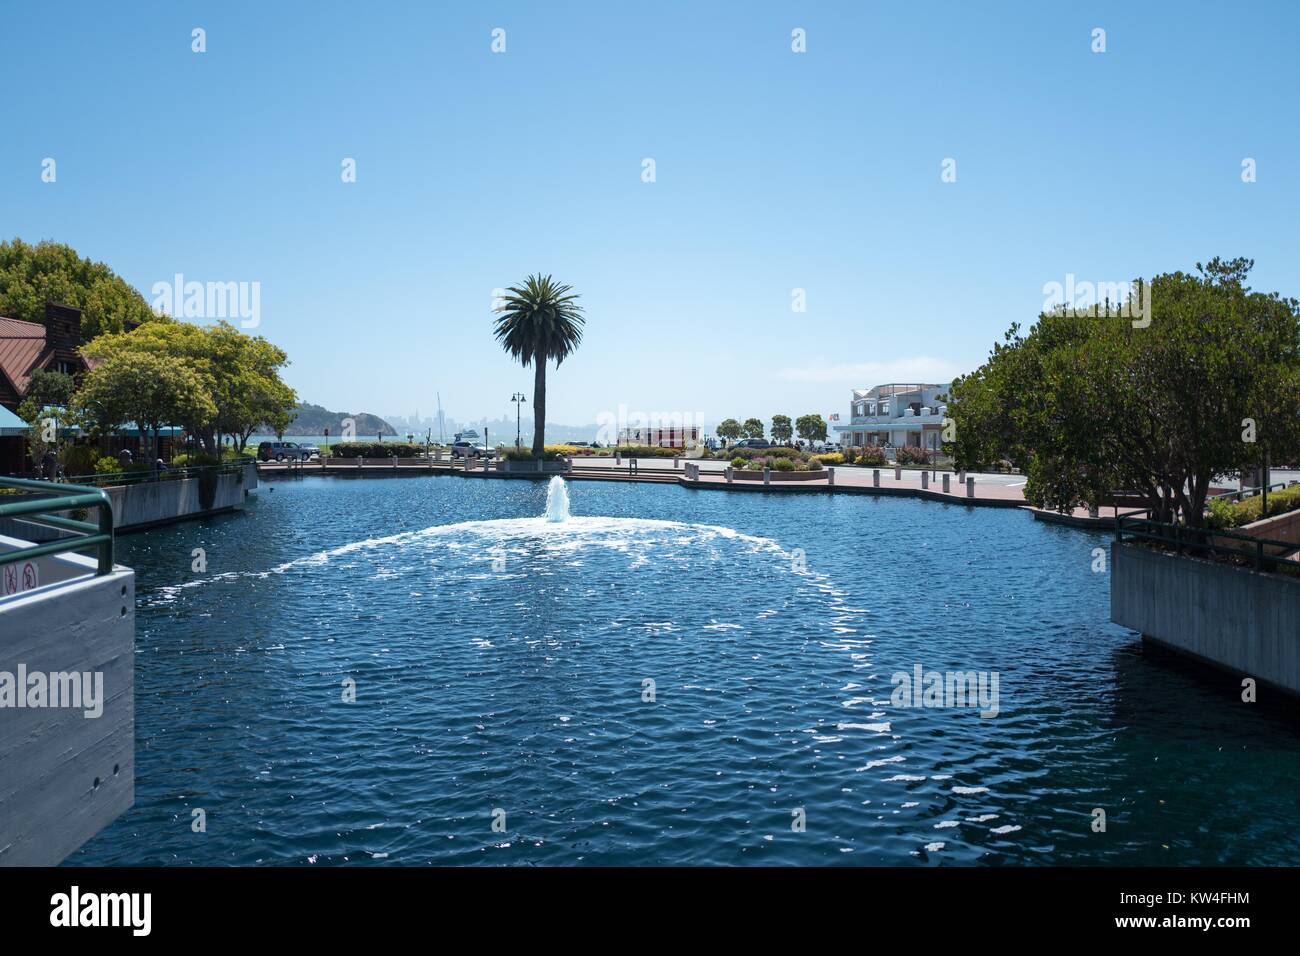 Fountains and palm trees are visible around Tiburon Lagoon, with San Francisco Bay and the shops along Main Street in the background, Tiburon, California, 2016. Stock Photo